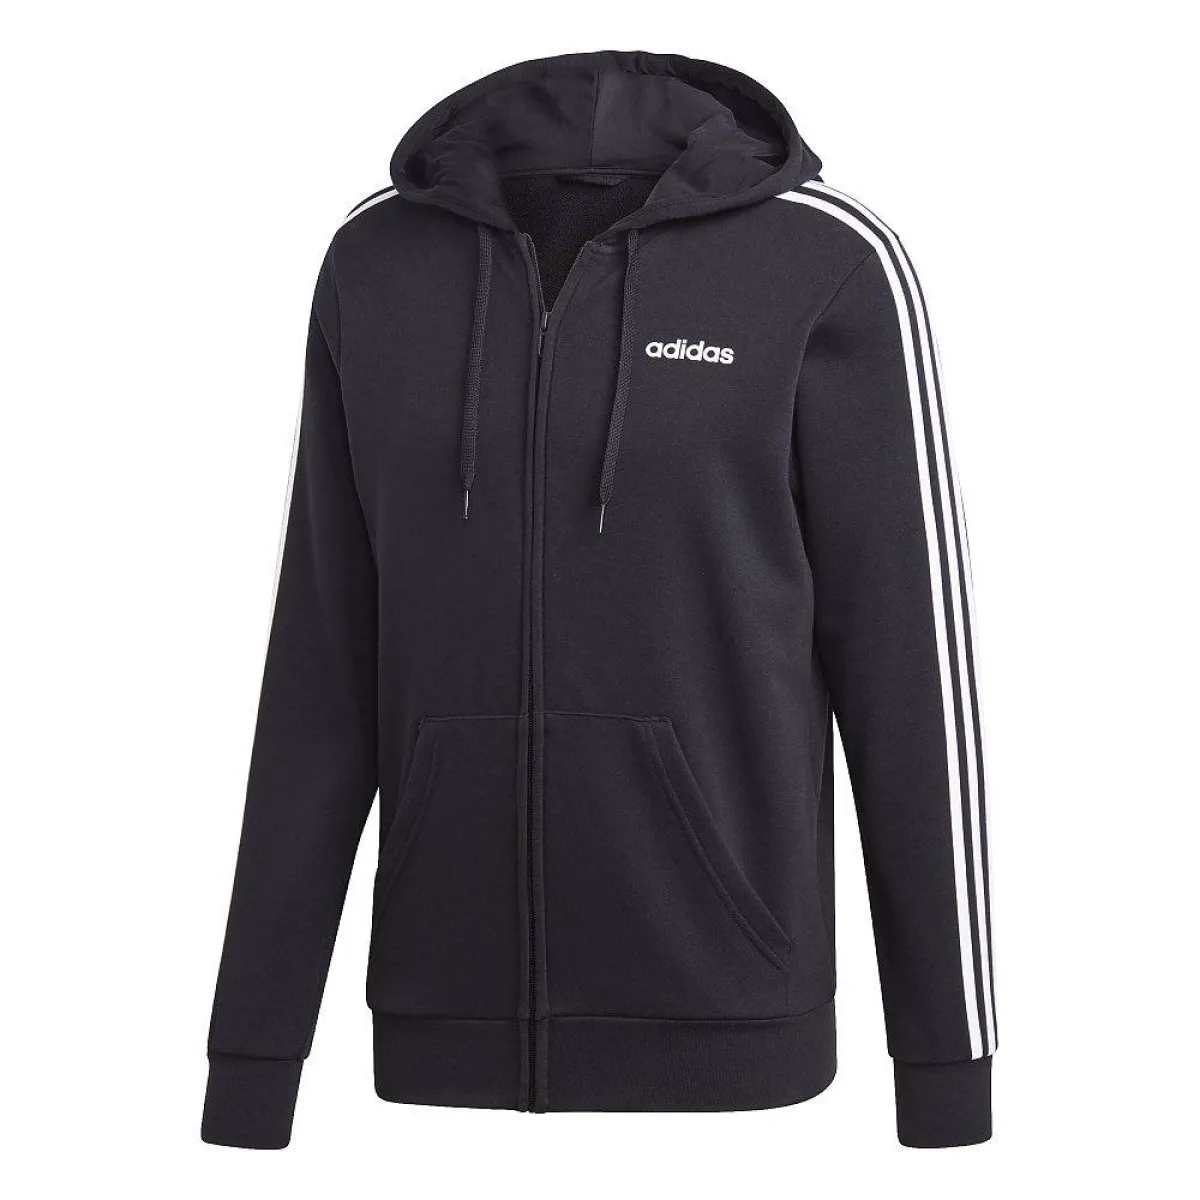 adidas Men s Sweat Jacket 3S French Terry black